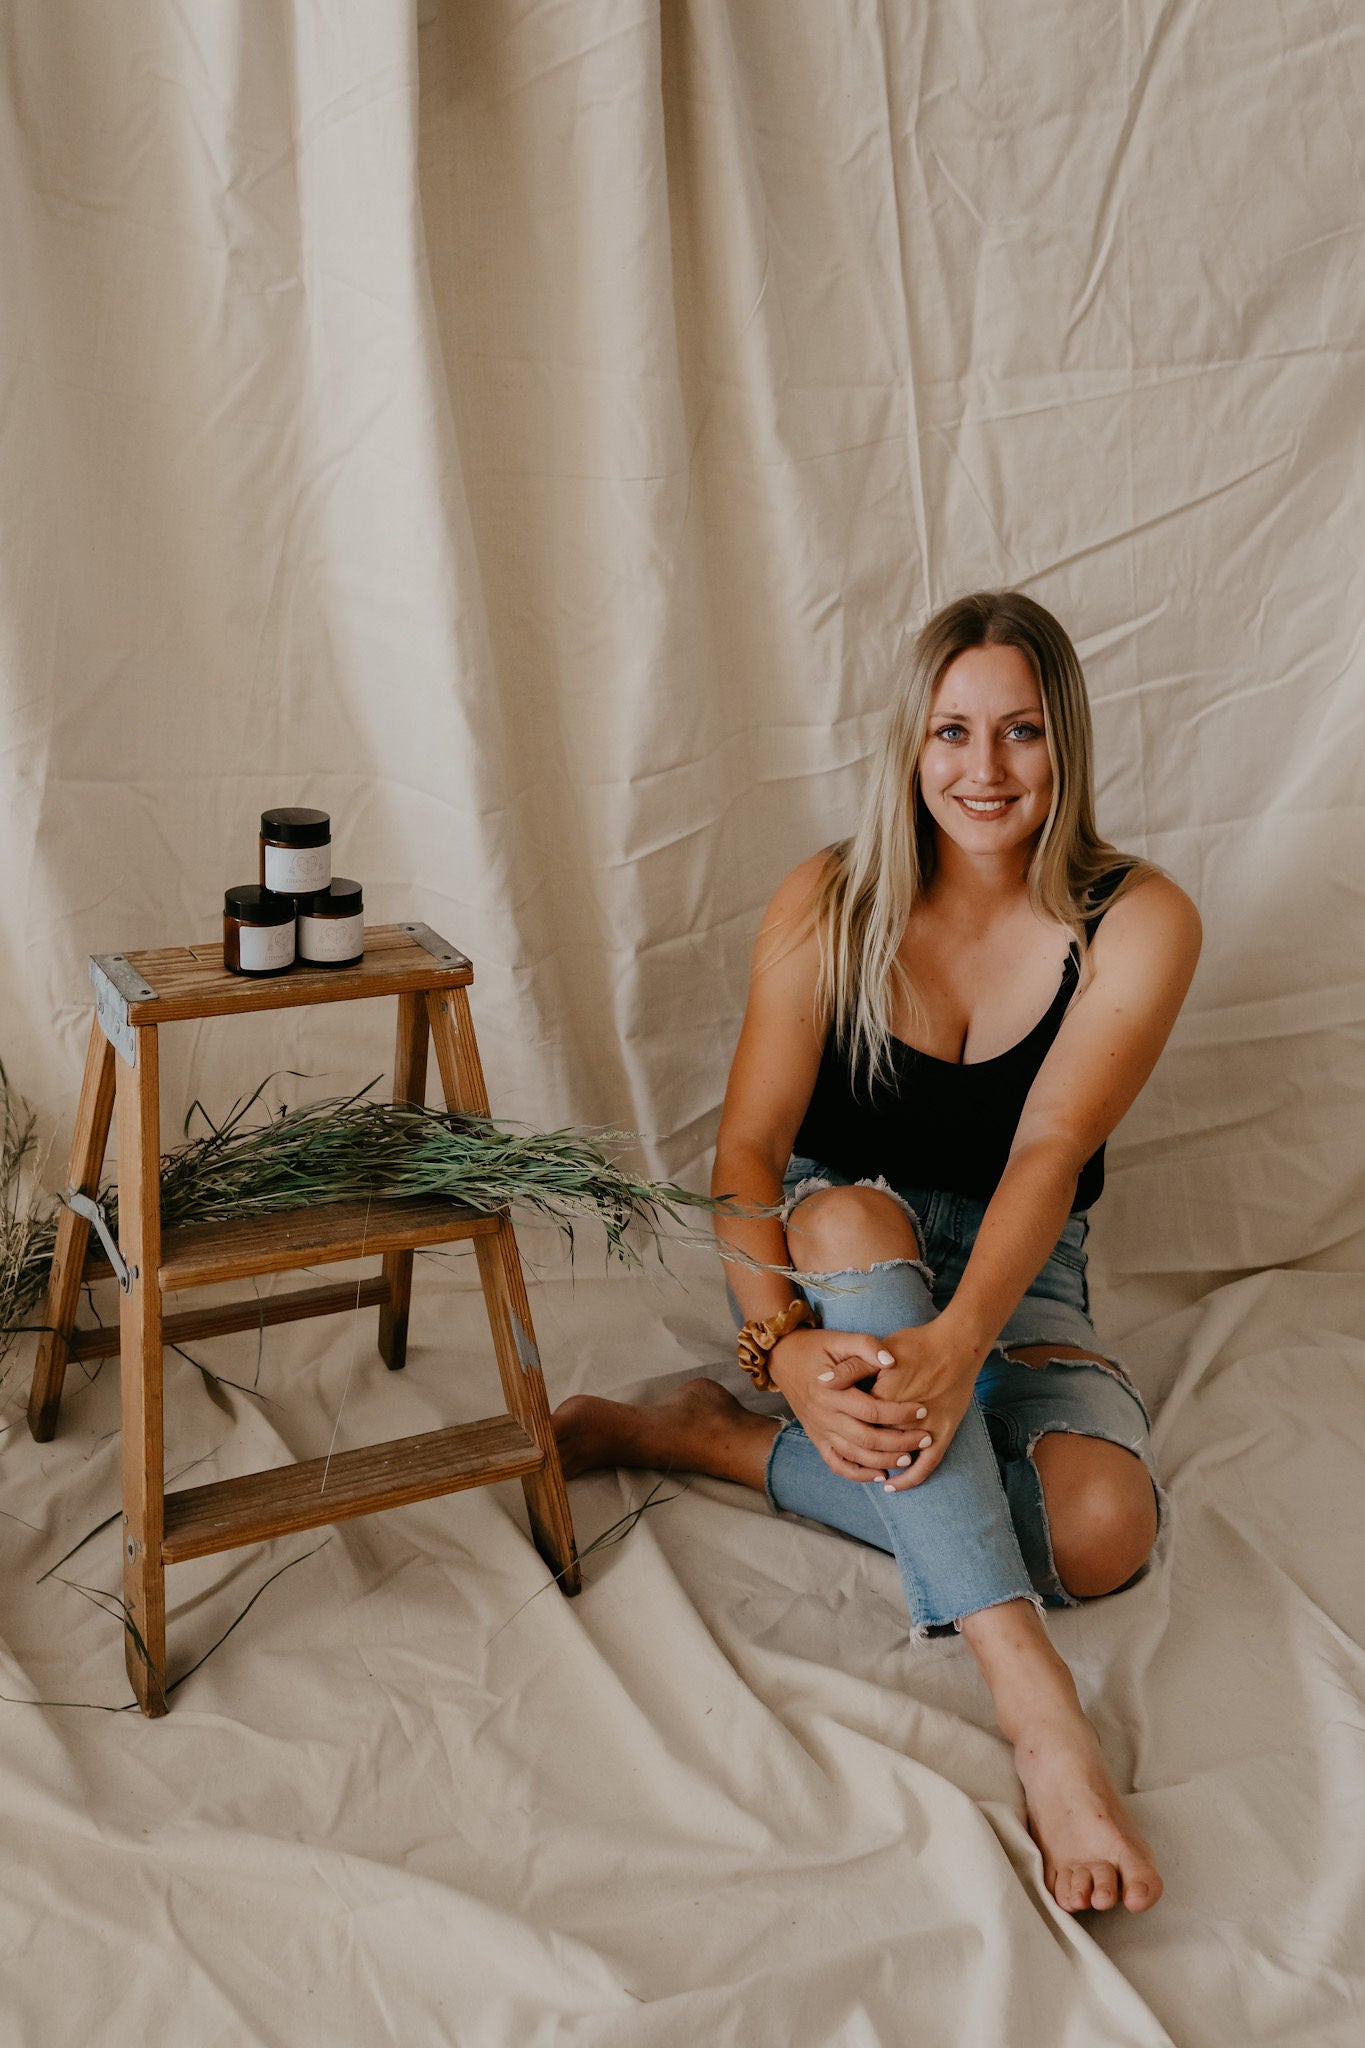 Eternal Tallow founder Kayla sits next to a bench with tallow skincare products